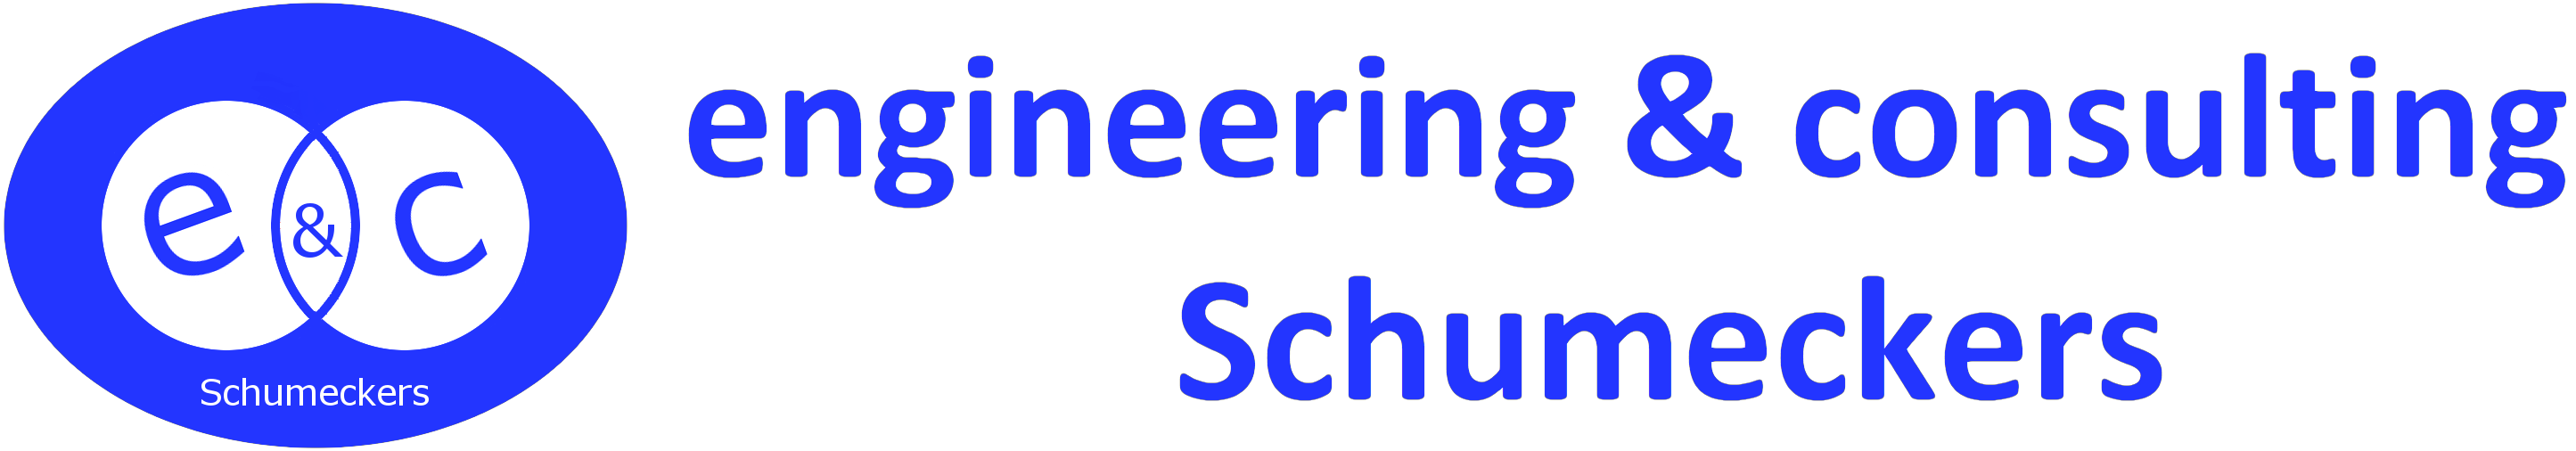 engineering & consulting Schumeckers